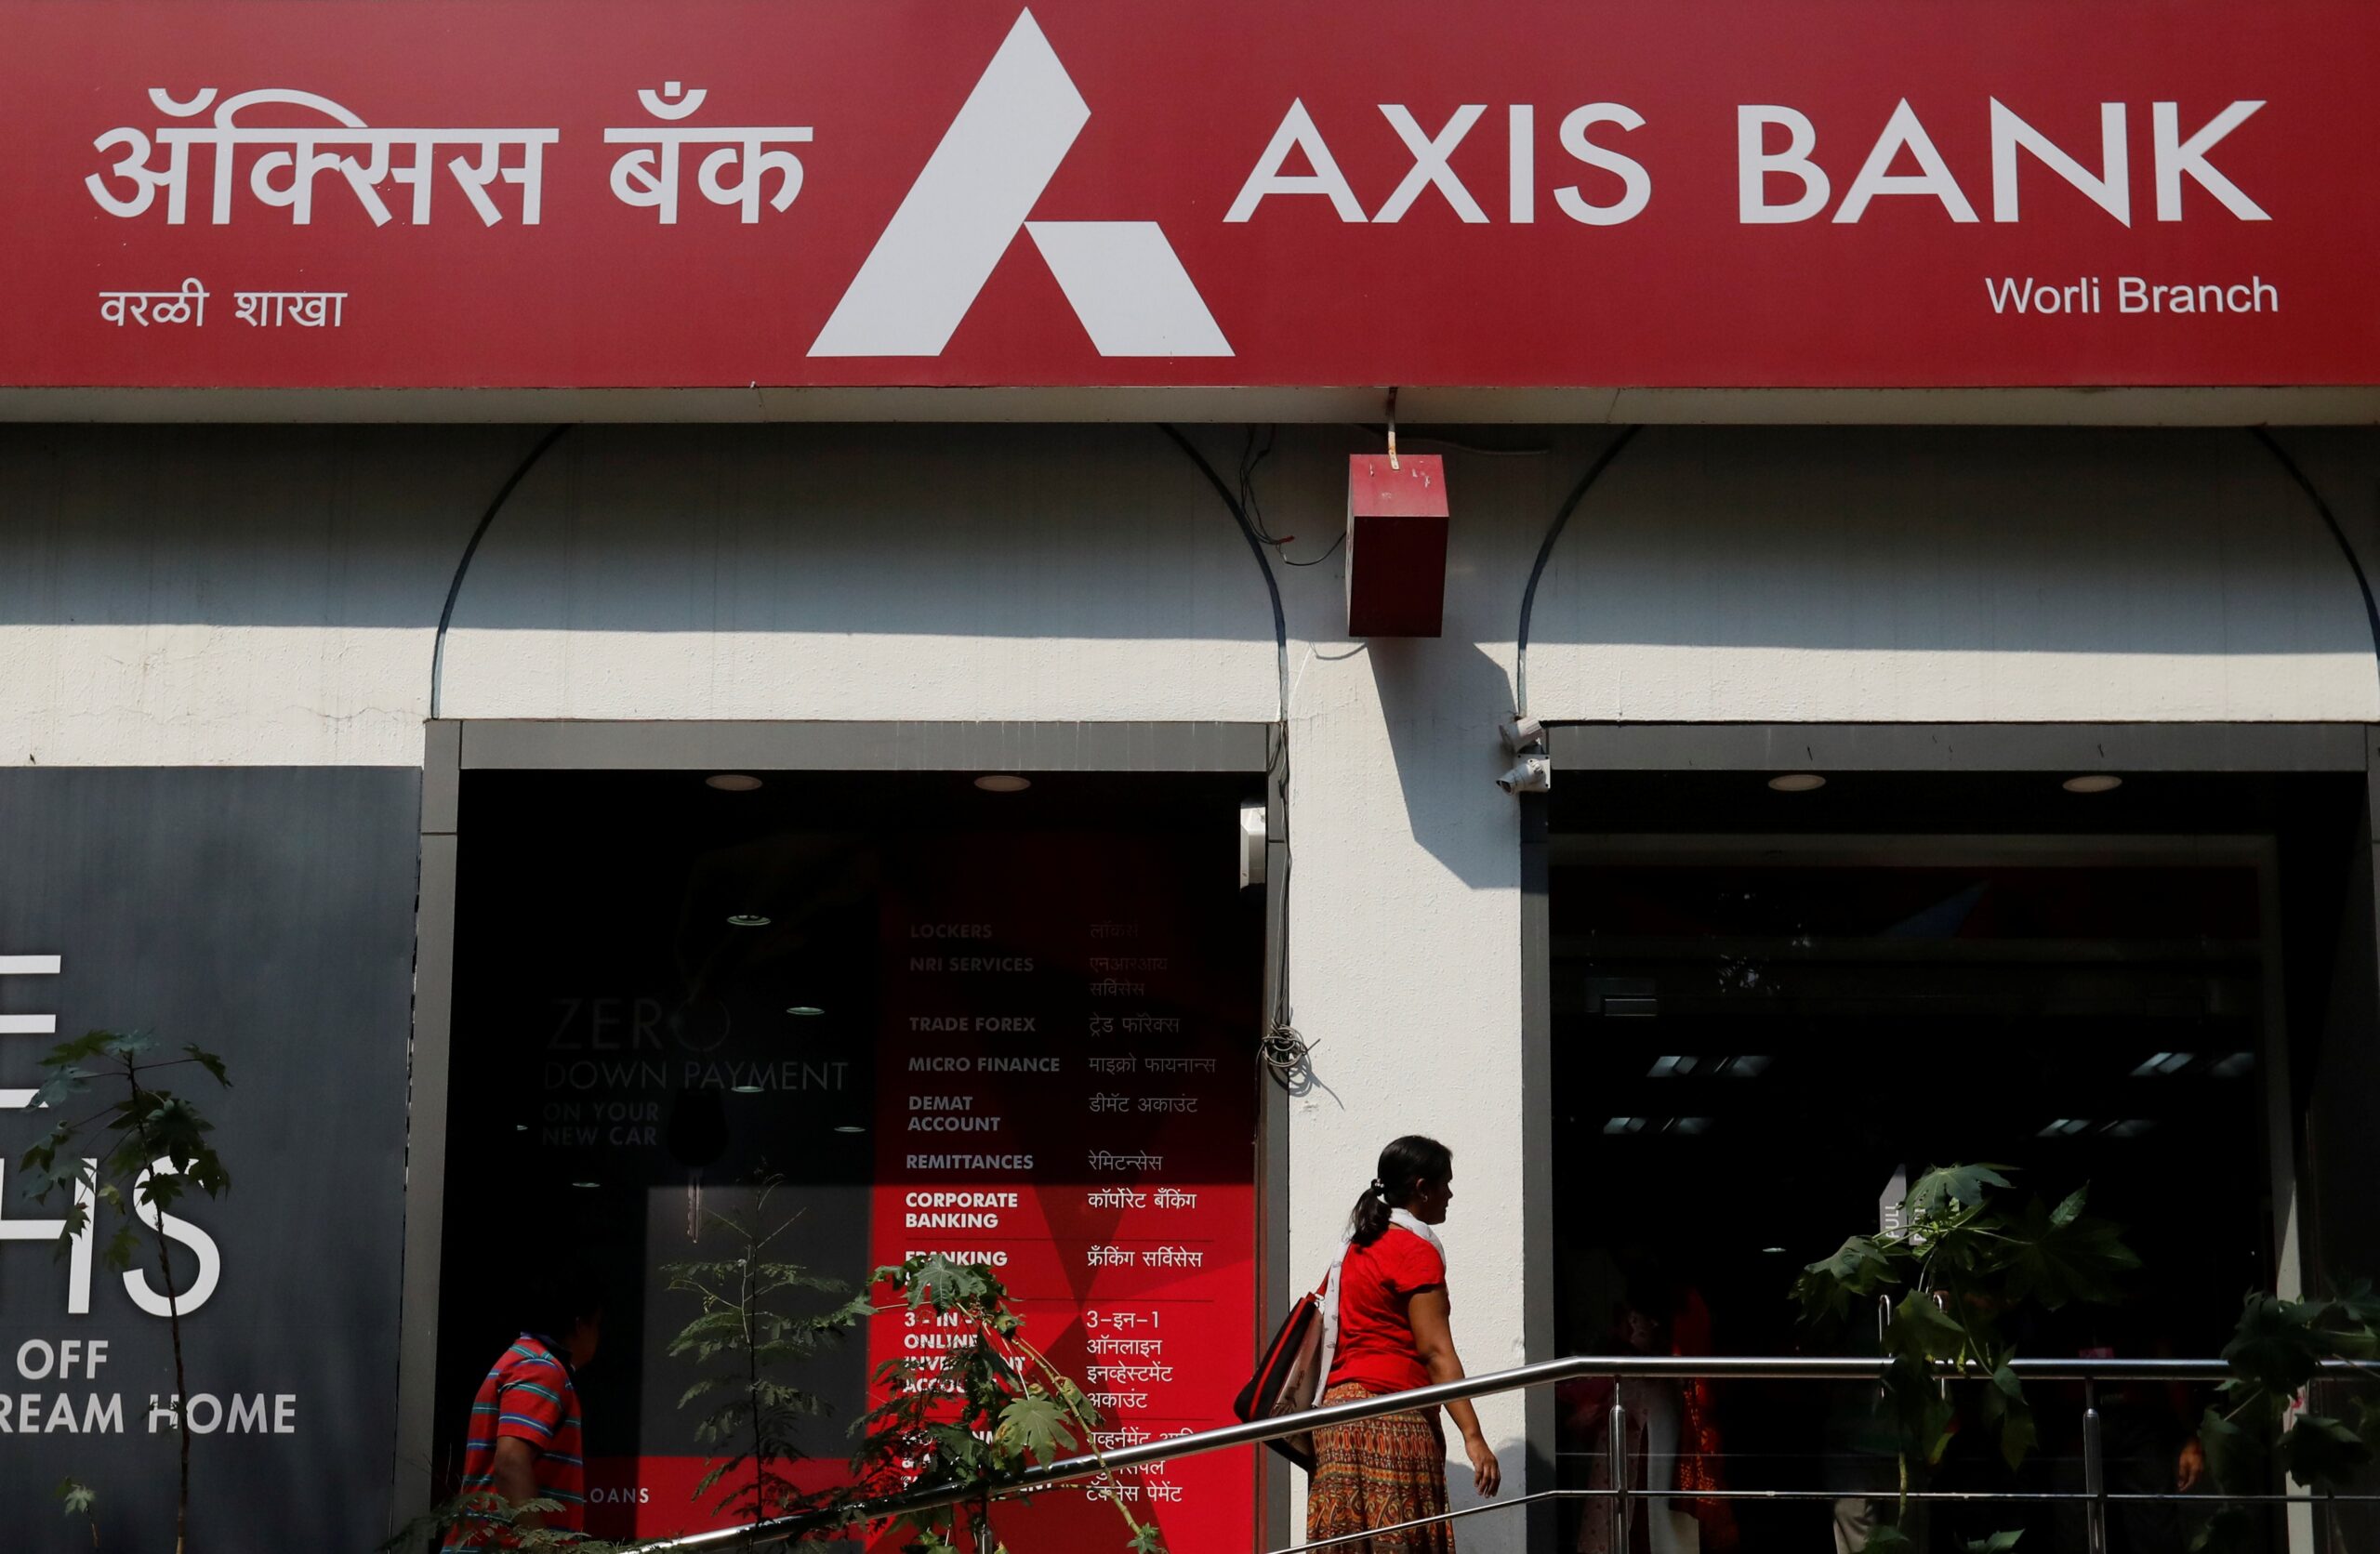 Axis Bank Credit Card Users Impacted By Fraudulent Transactions: Report